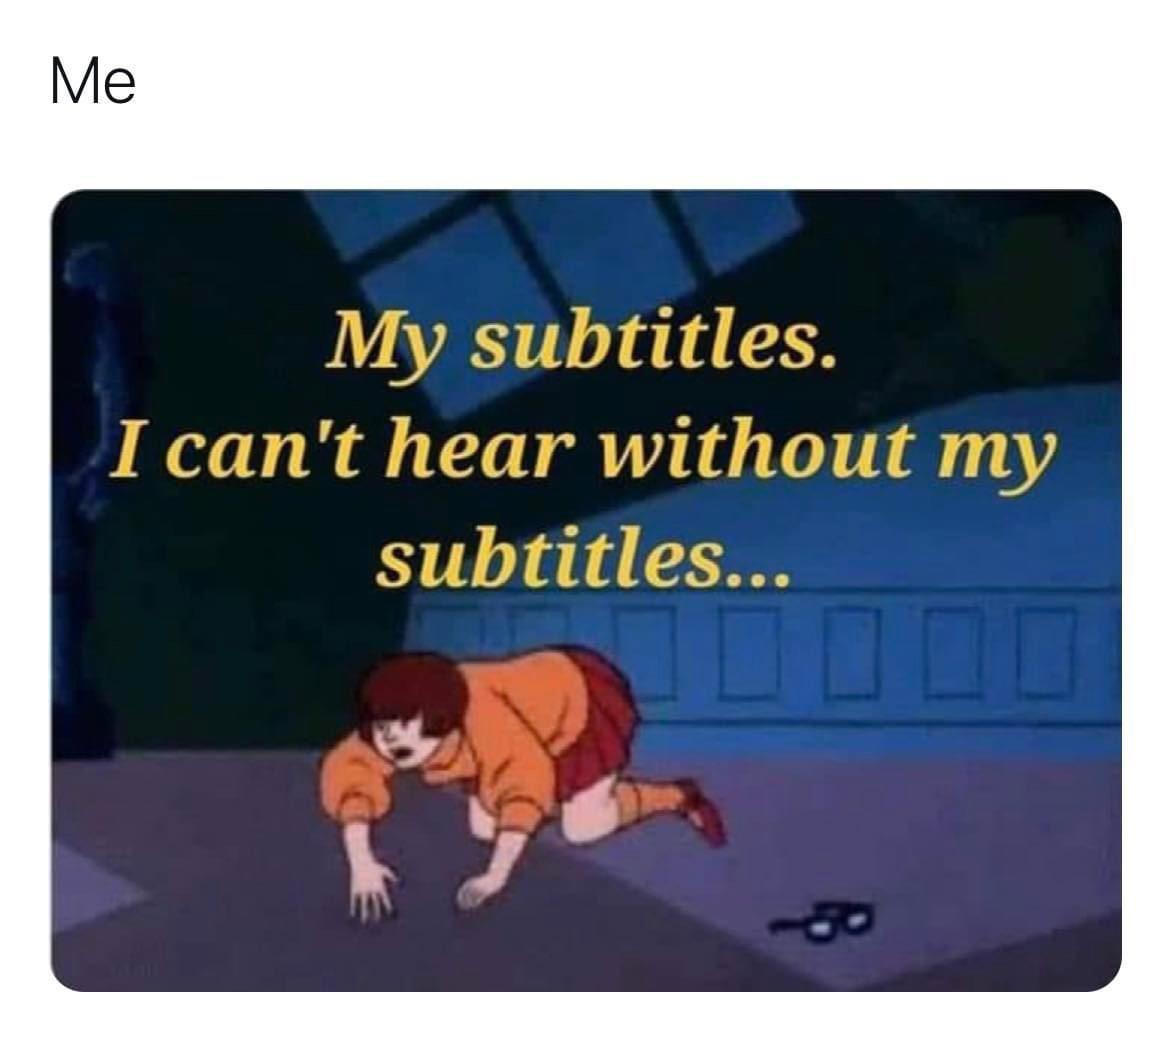 funny memes - dank memes - Text - Me My subtitles. I can't hear without my subtitles... 10